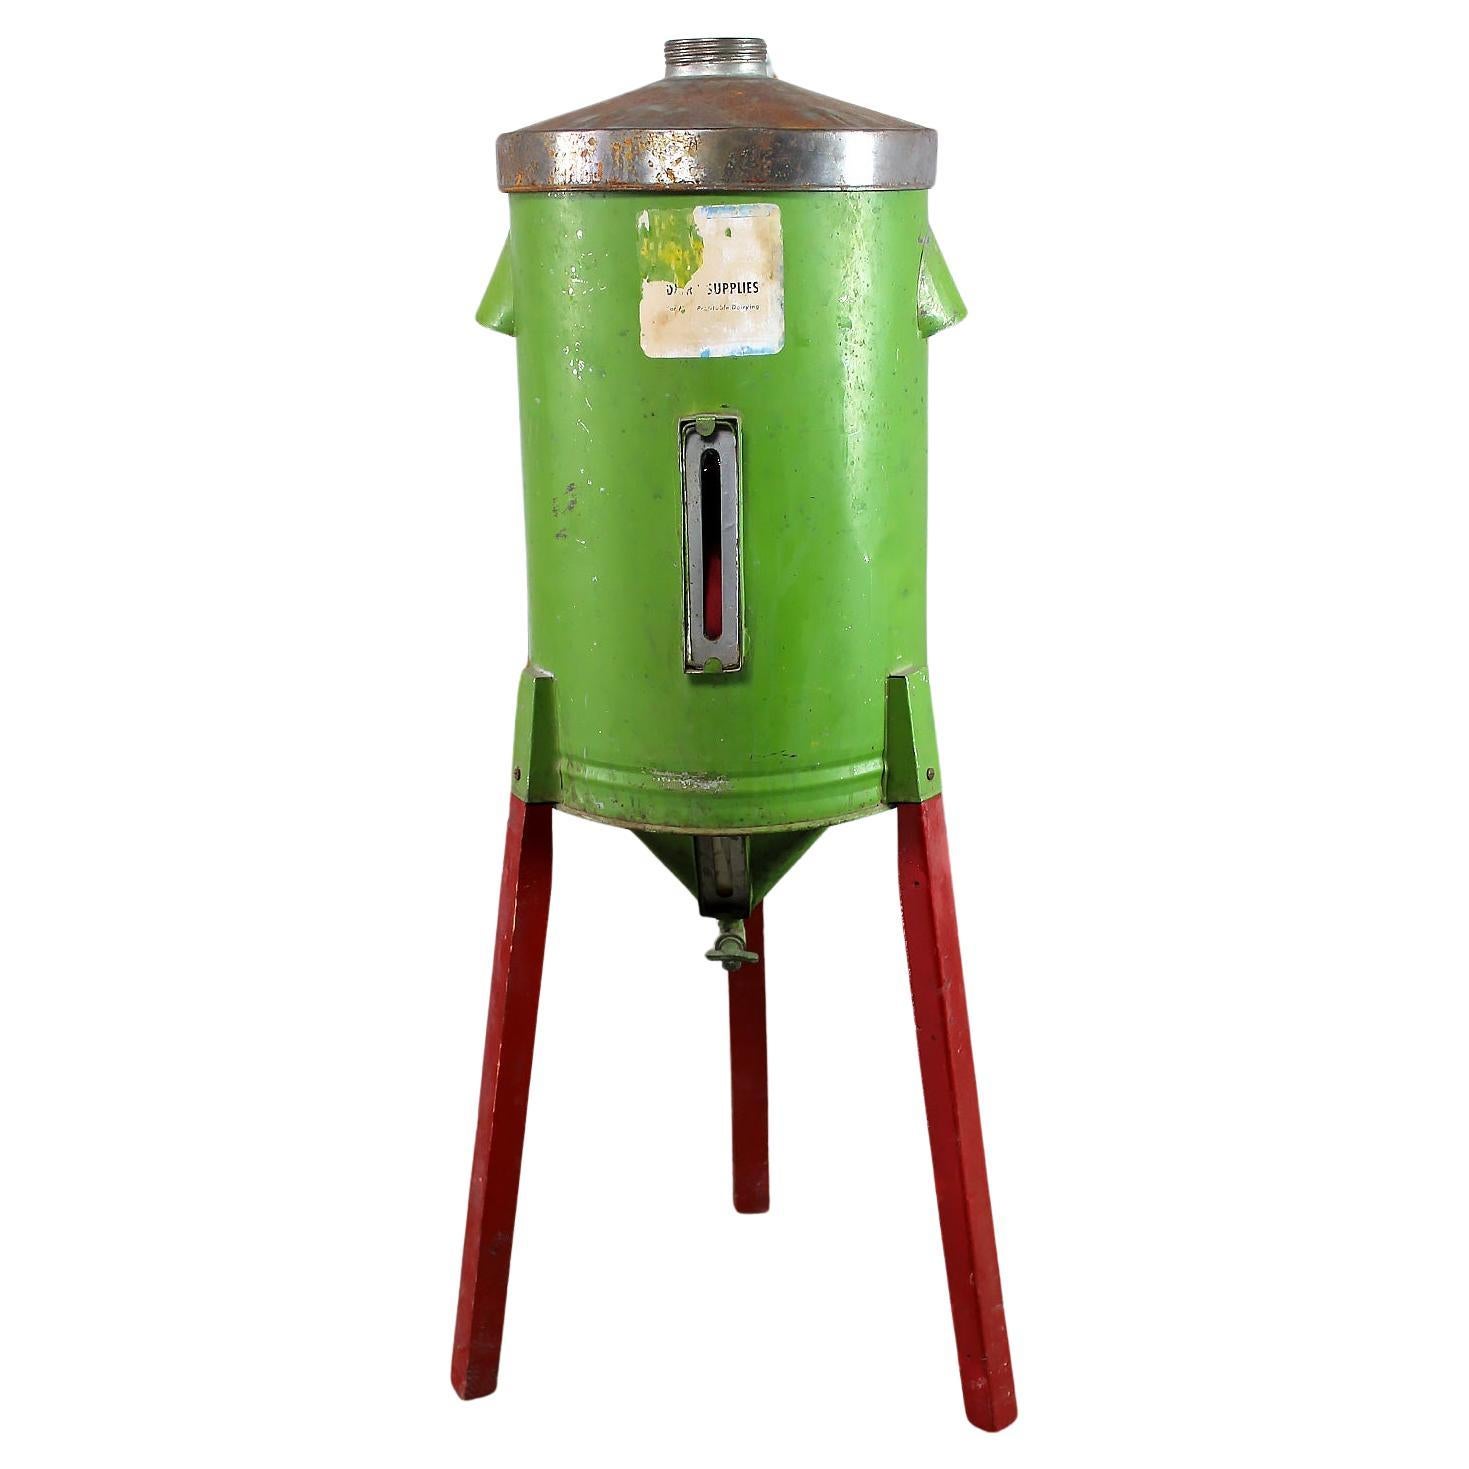 Early - Mid-20th Century Rustic Gravity Cream Separator Green Metal Can Red Legs For Sale